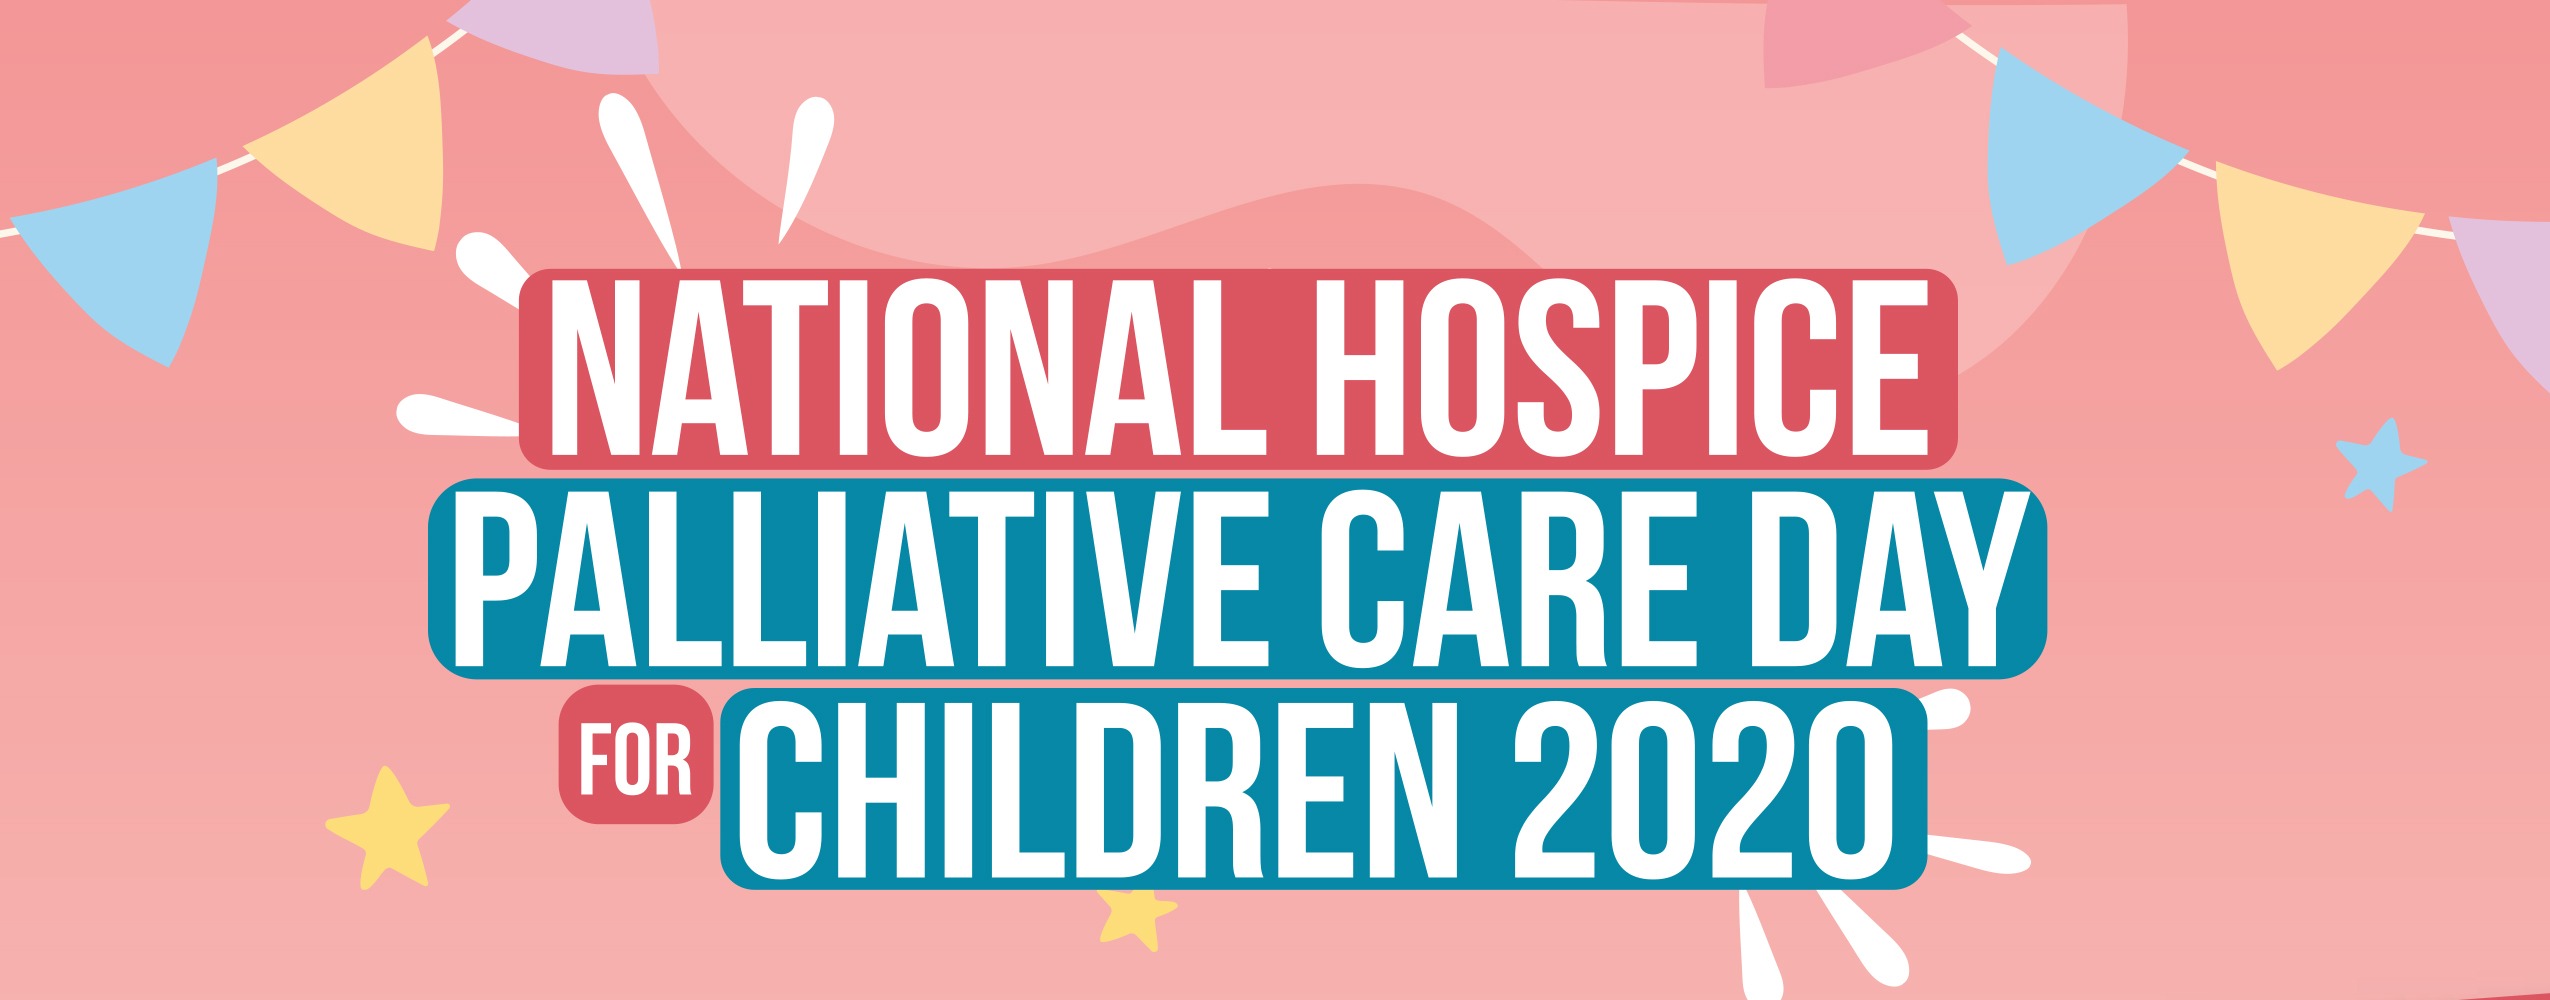 National hospice palliative care day for children poster